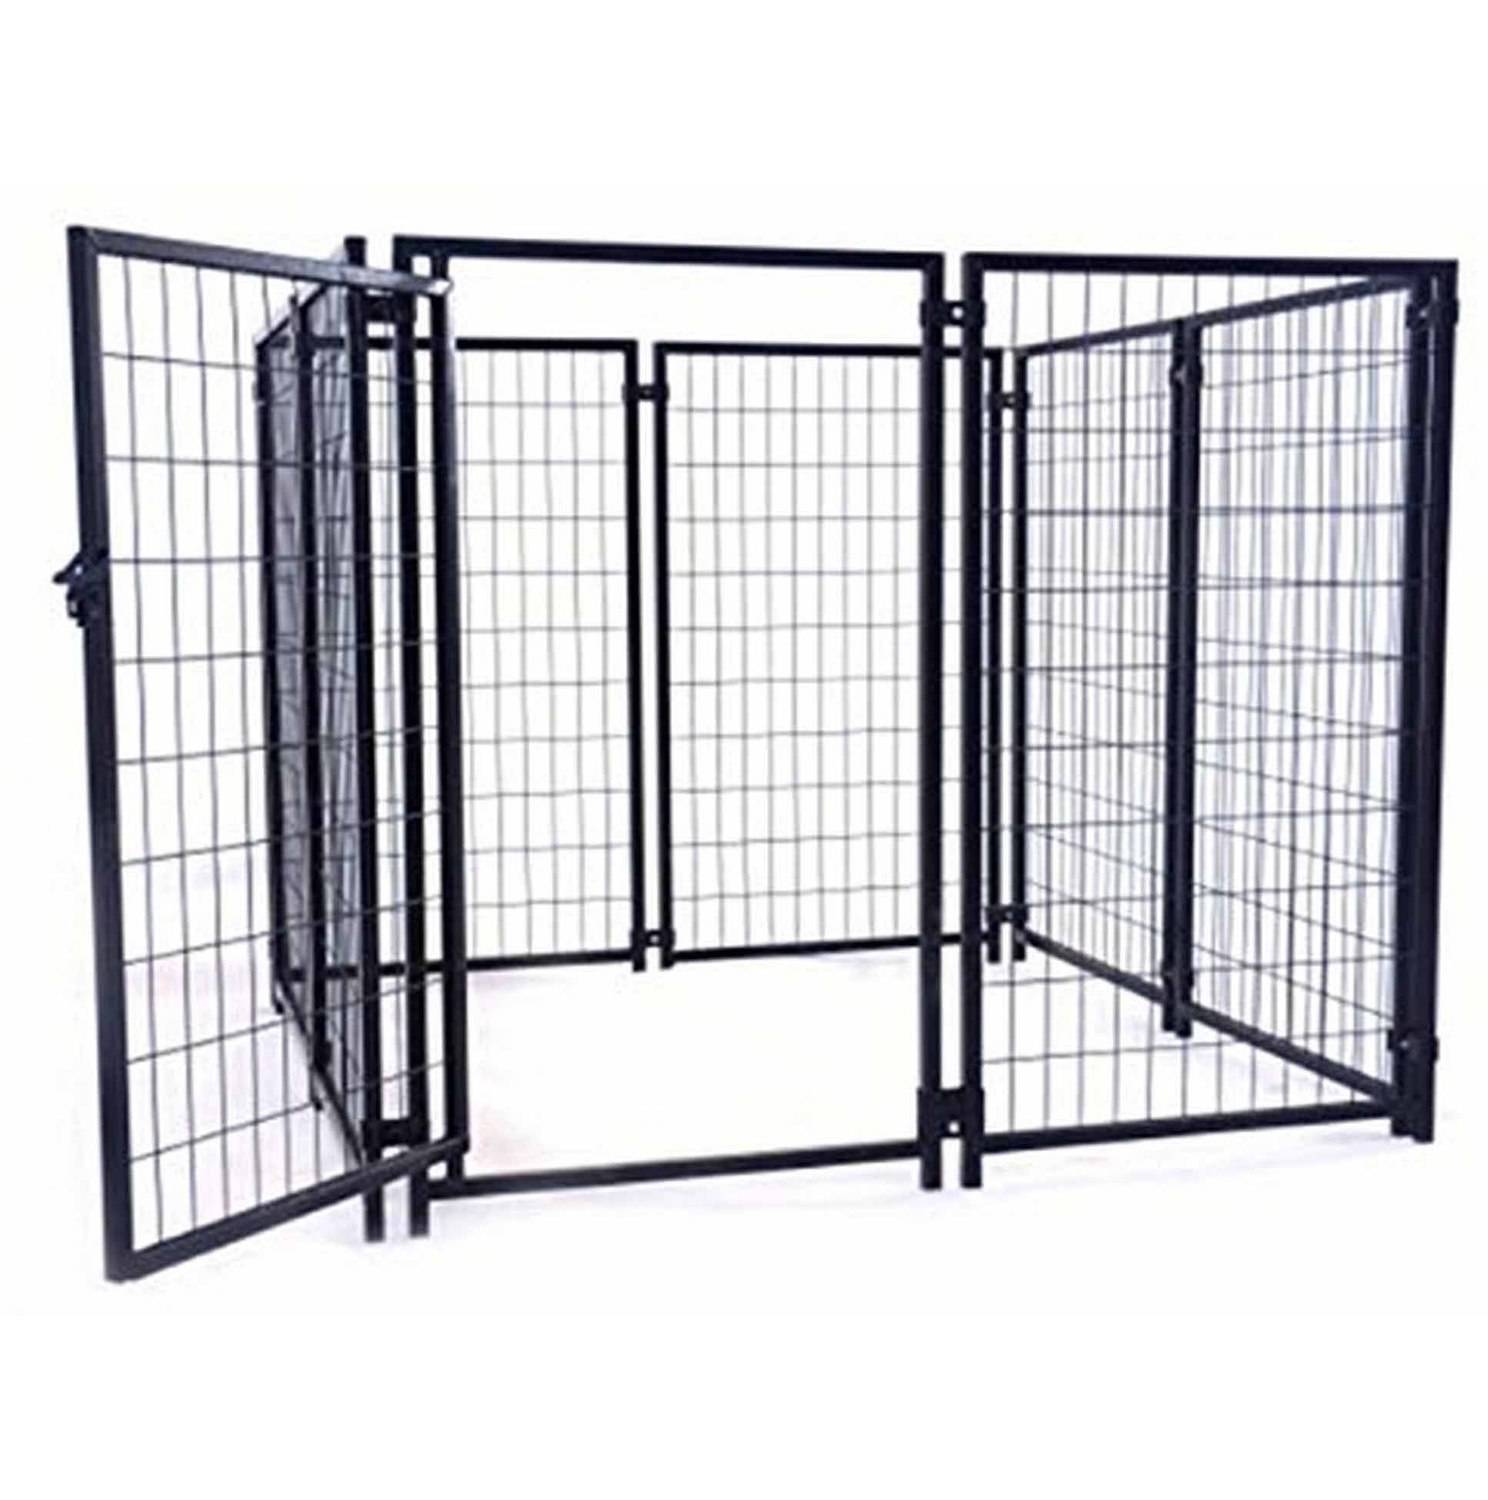 Portable Fencing For Dogs Lowes Electric